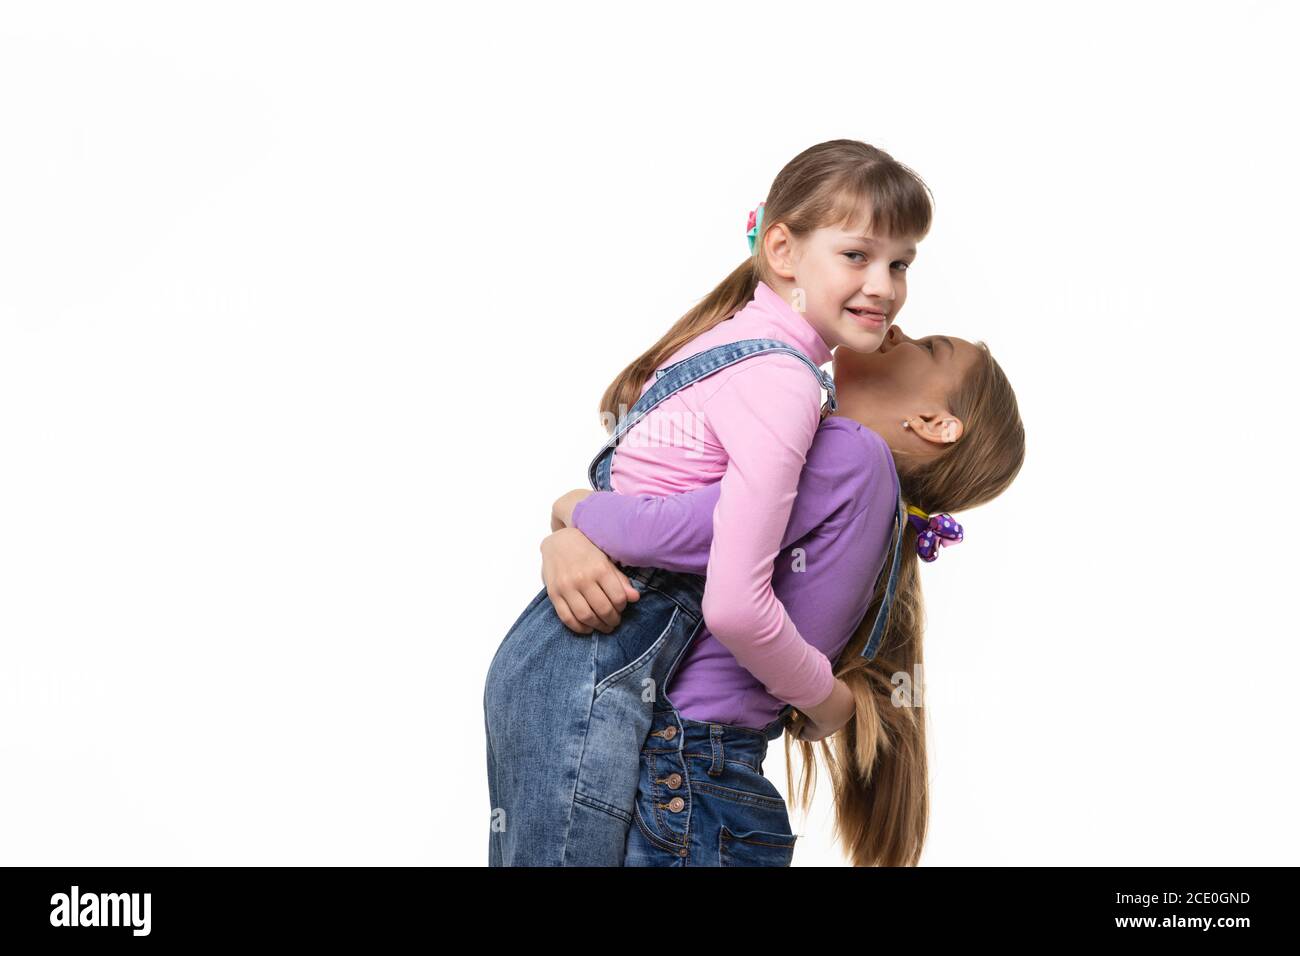 Girl lifted and hugged another a girl Stock Photo